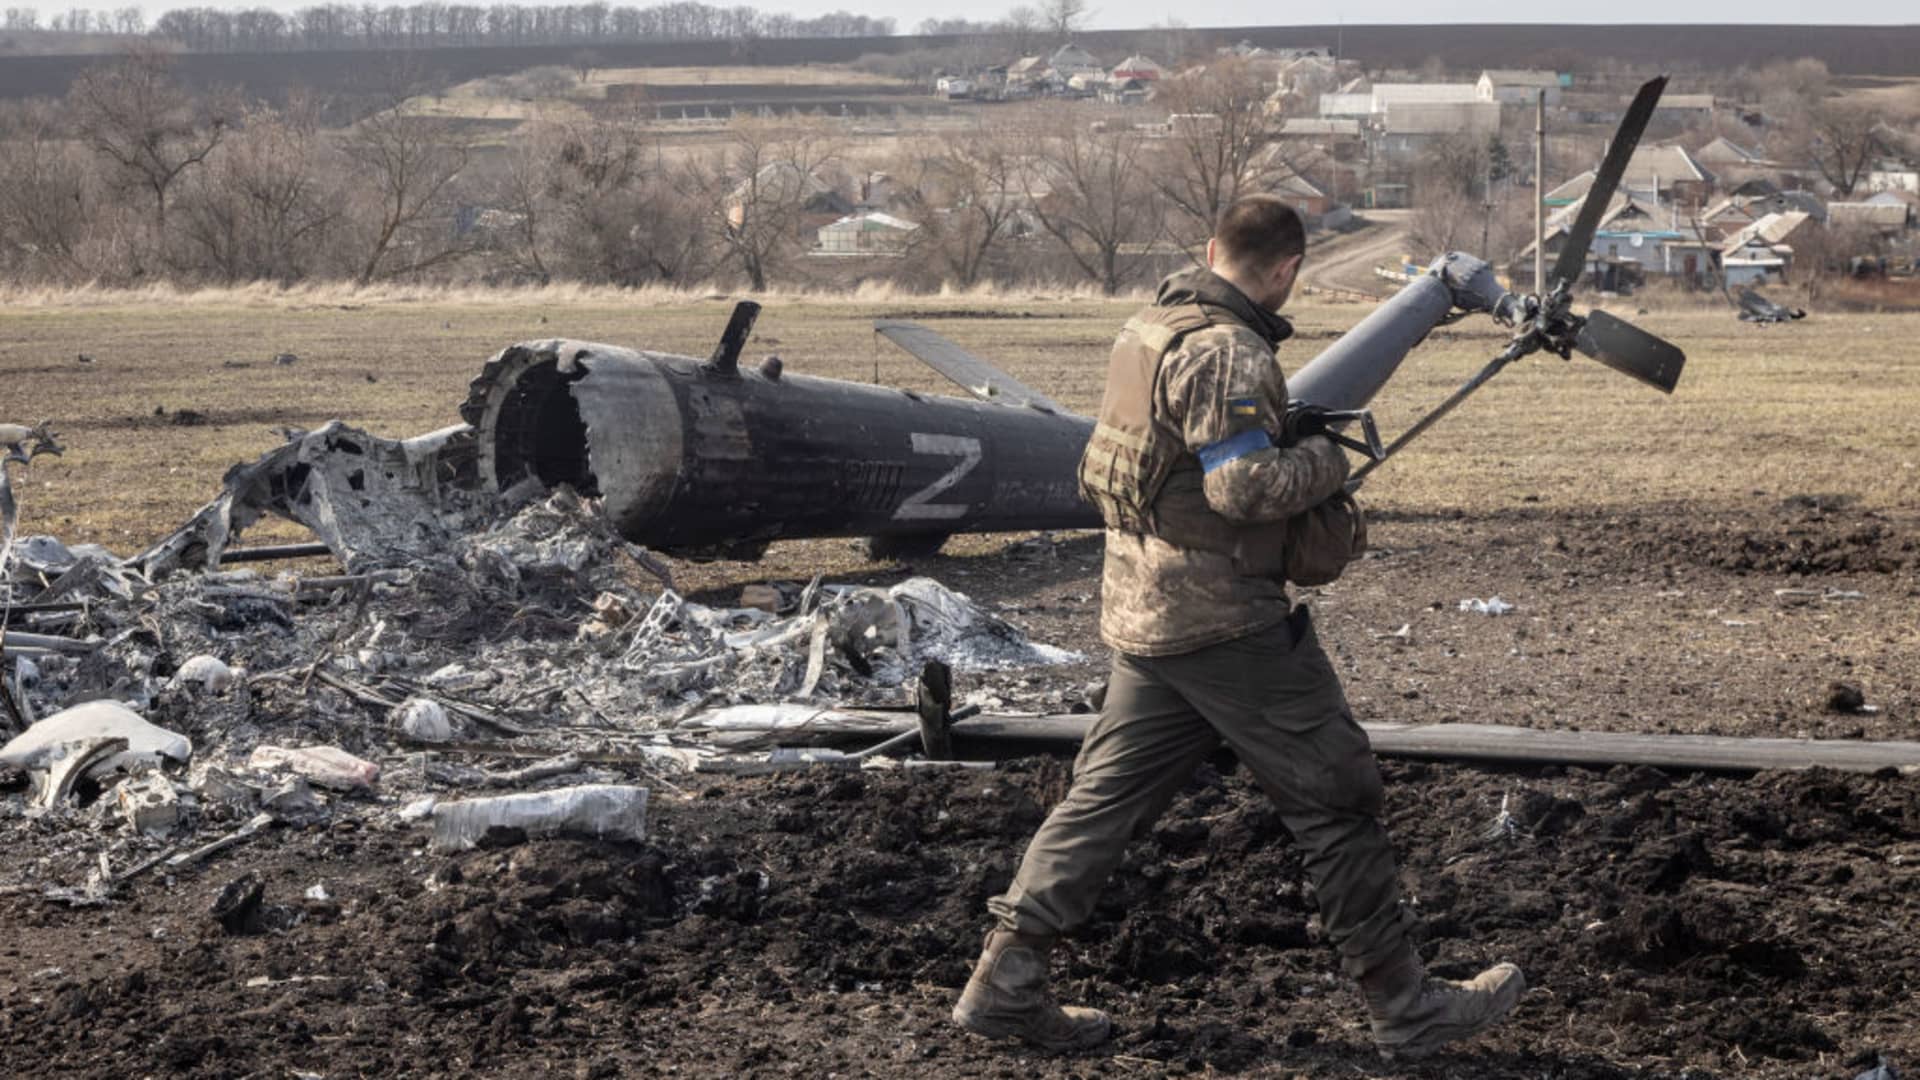 A Ukrainian soldier walks past the remains of a downed Russian helicopter near Kharkiv on March 31, 2022.